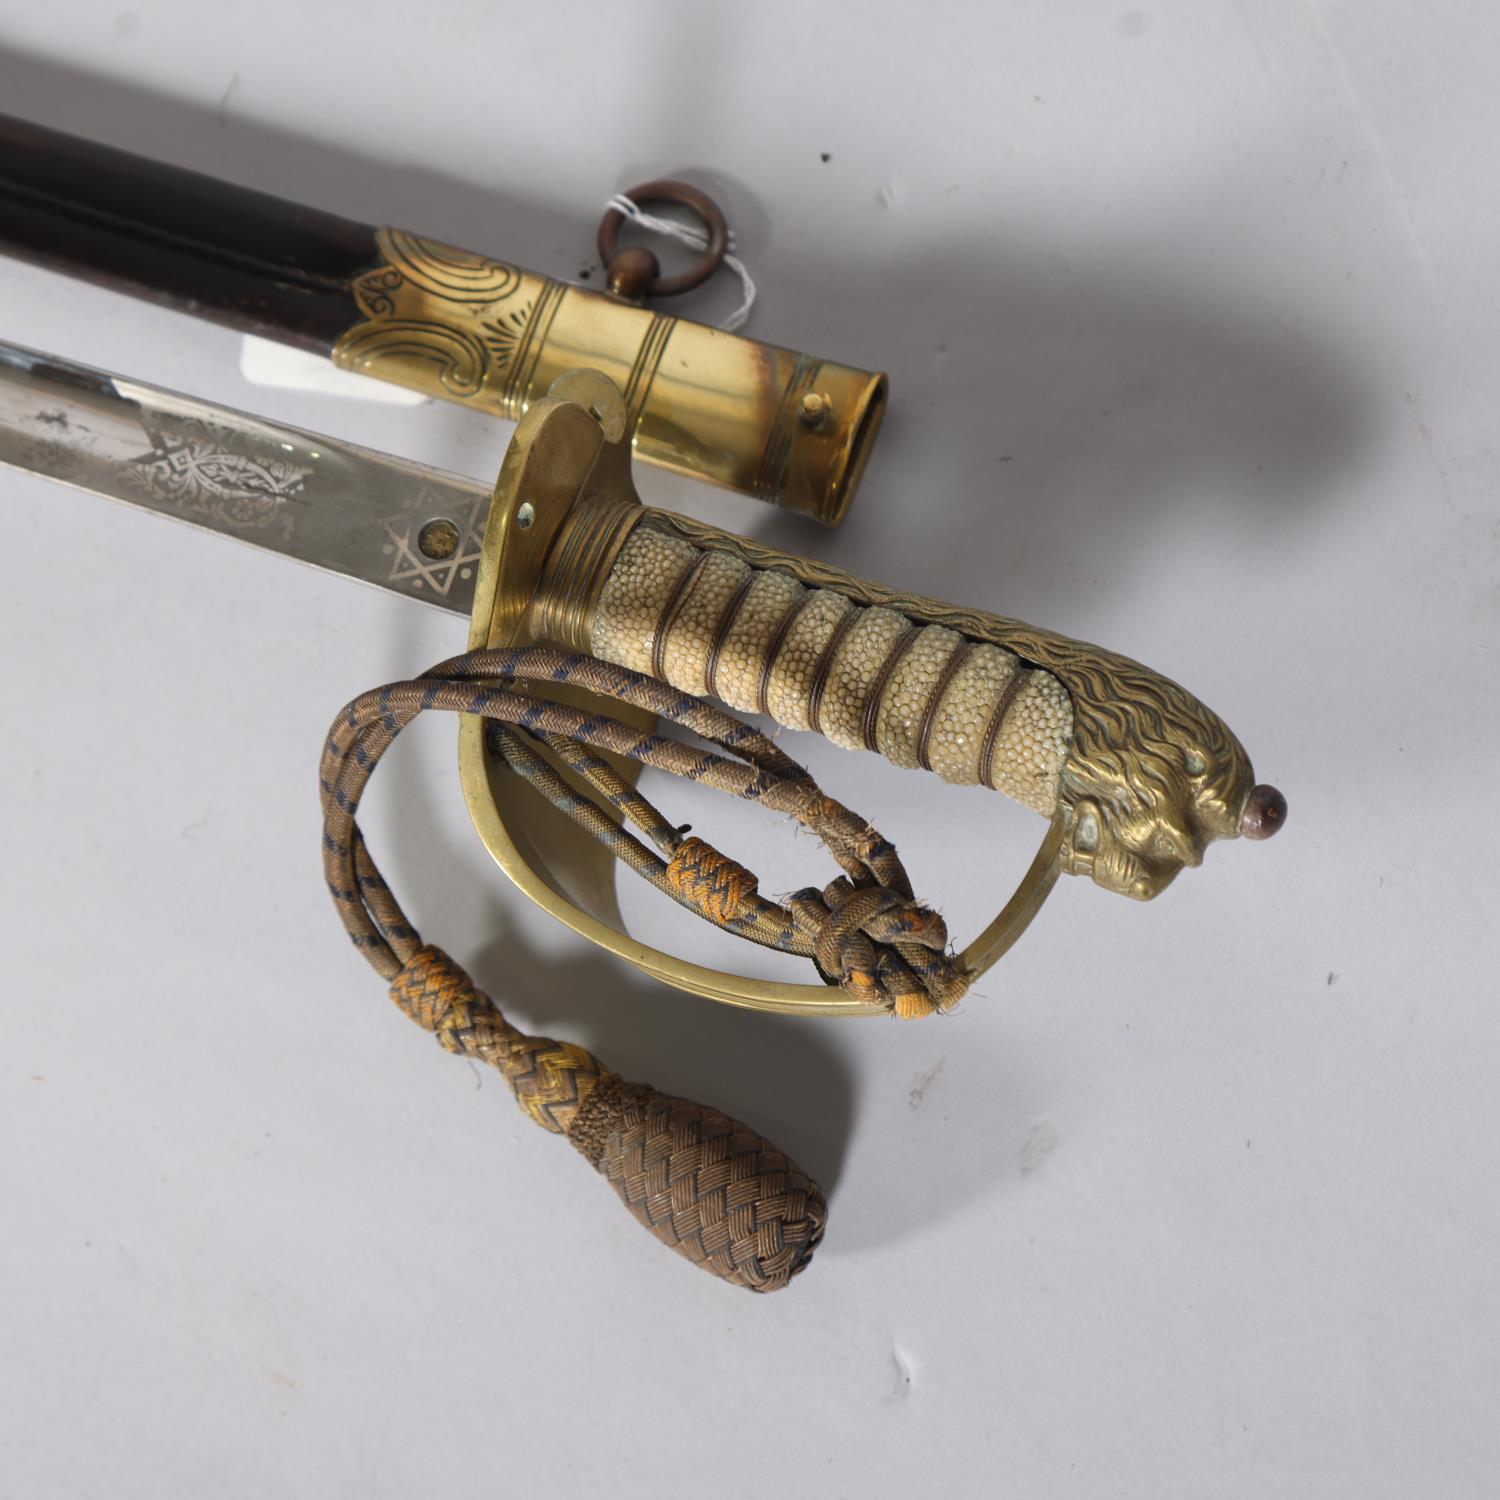 Royal Navy Officer's dress sword, with shagreen and brass hilt, Army & Navy Cooperative Society - Image 2 of 3